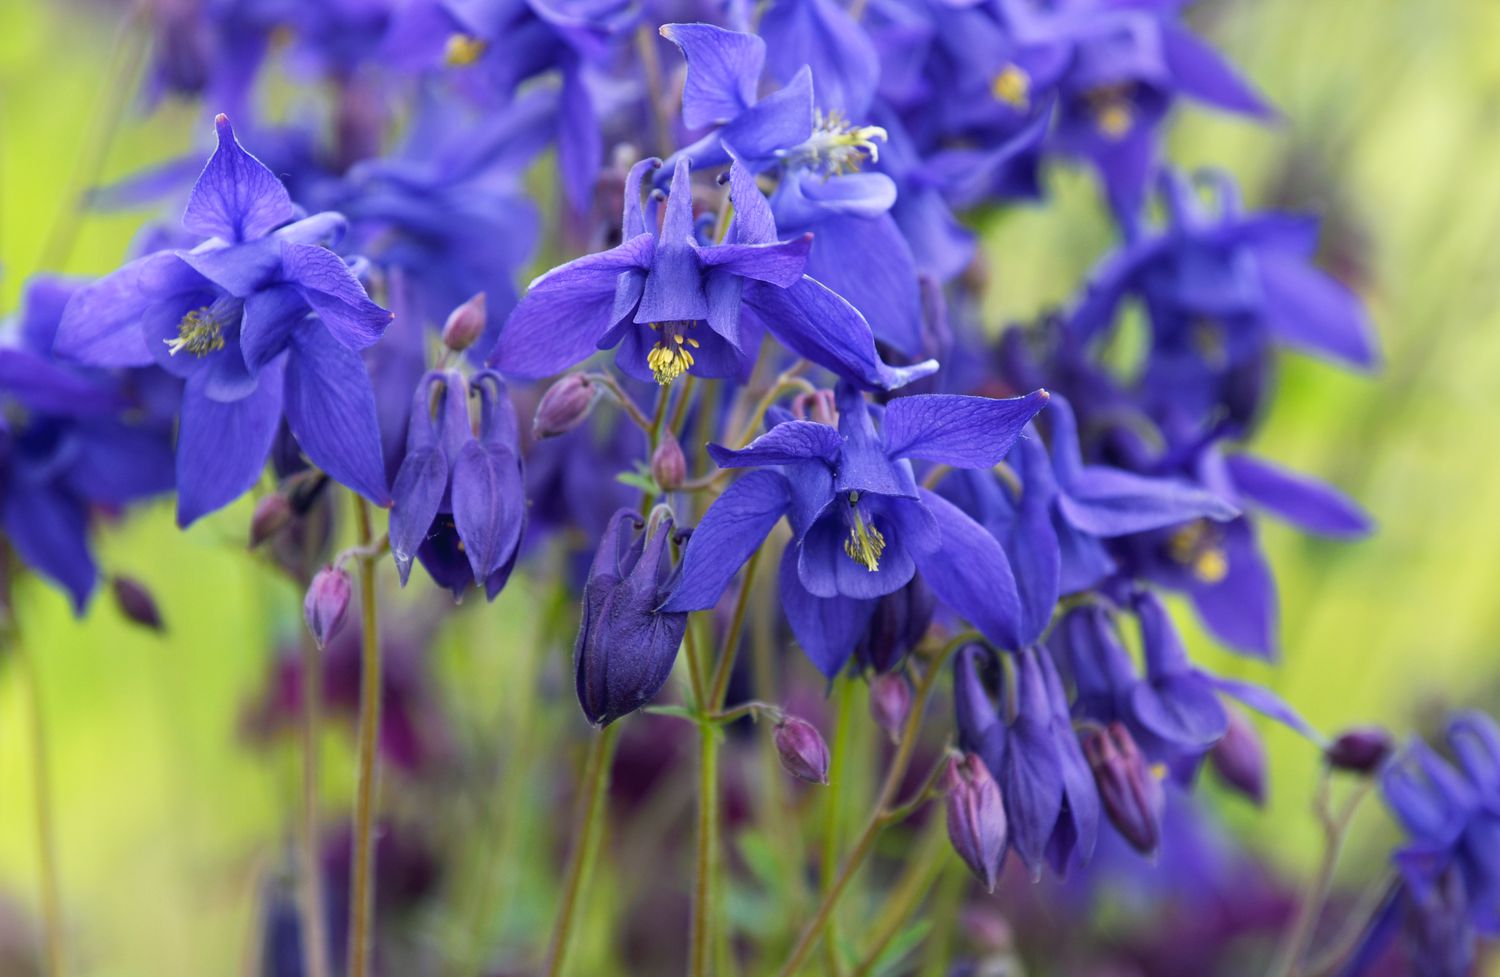 Columbine flowers with deep purple petals and spurs clustered on thin stems